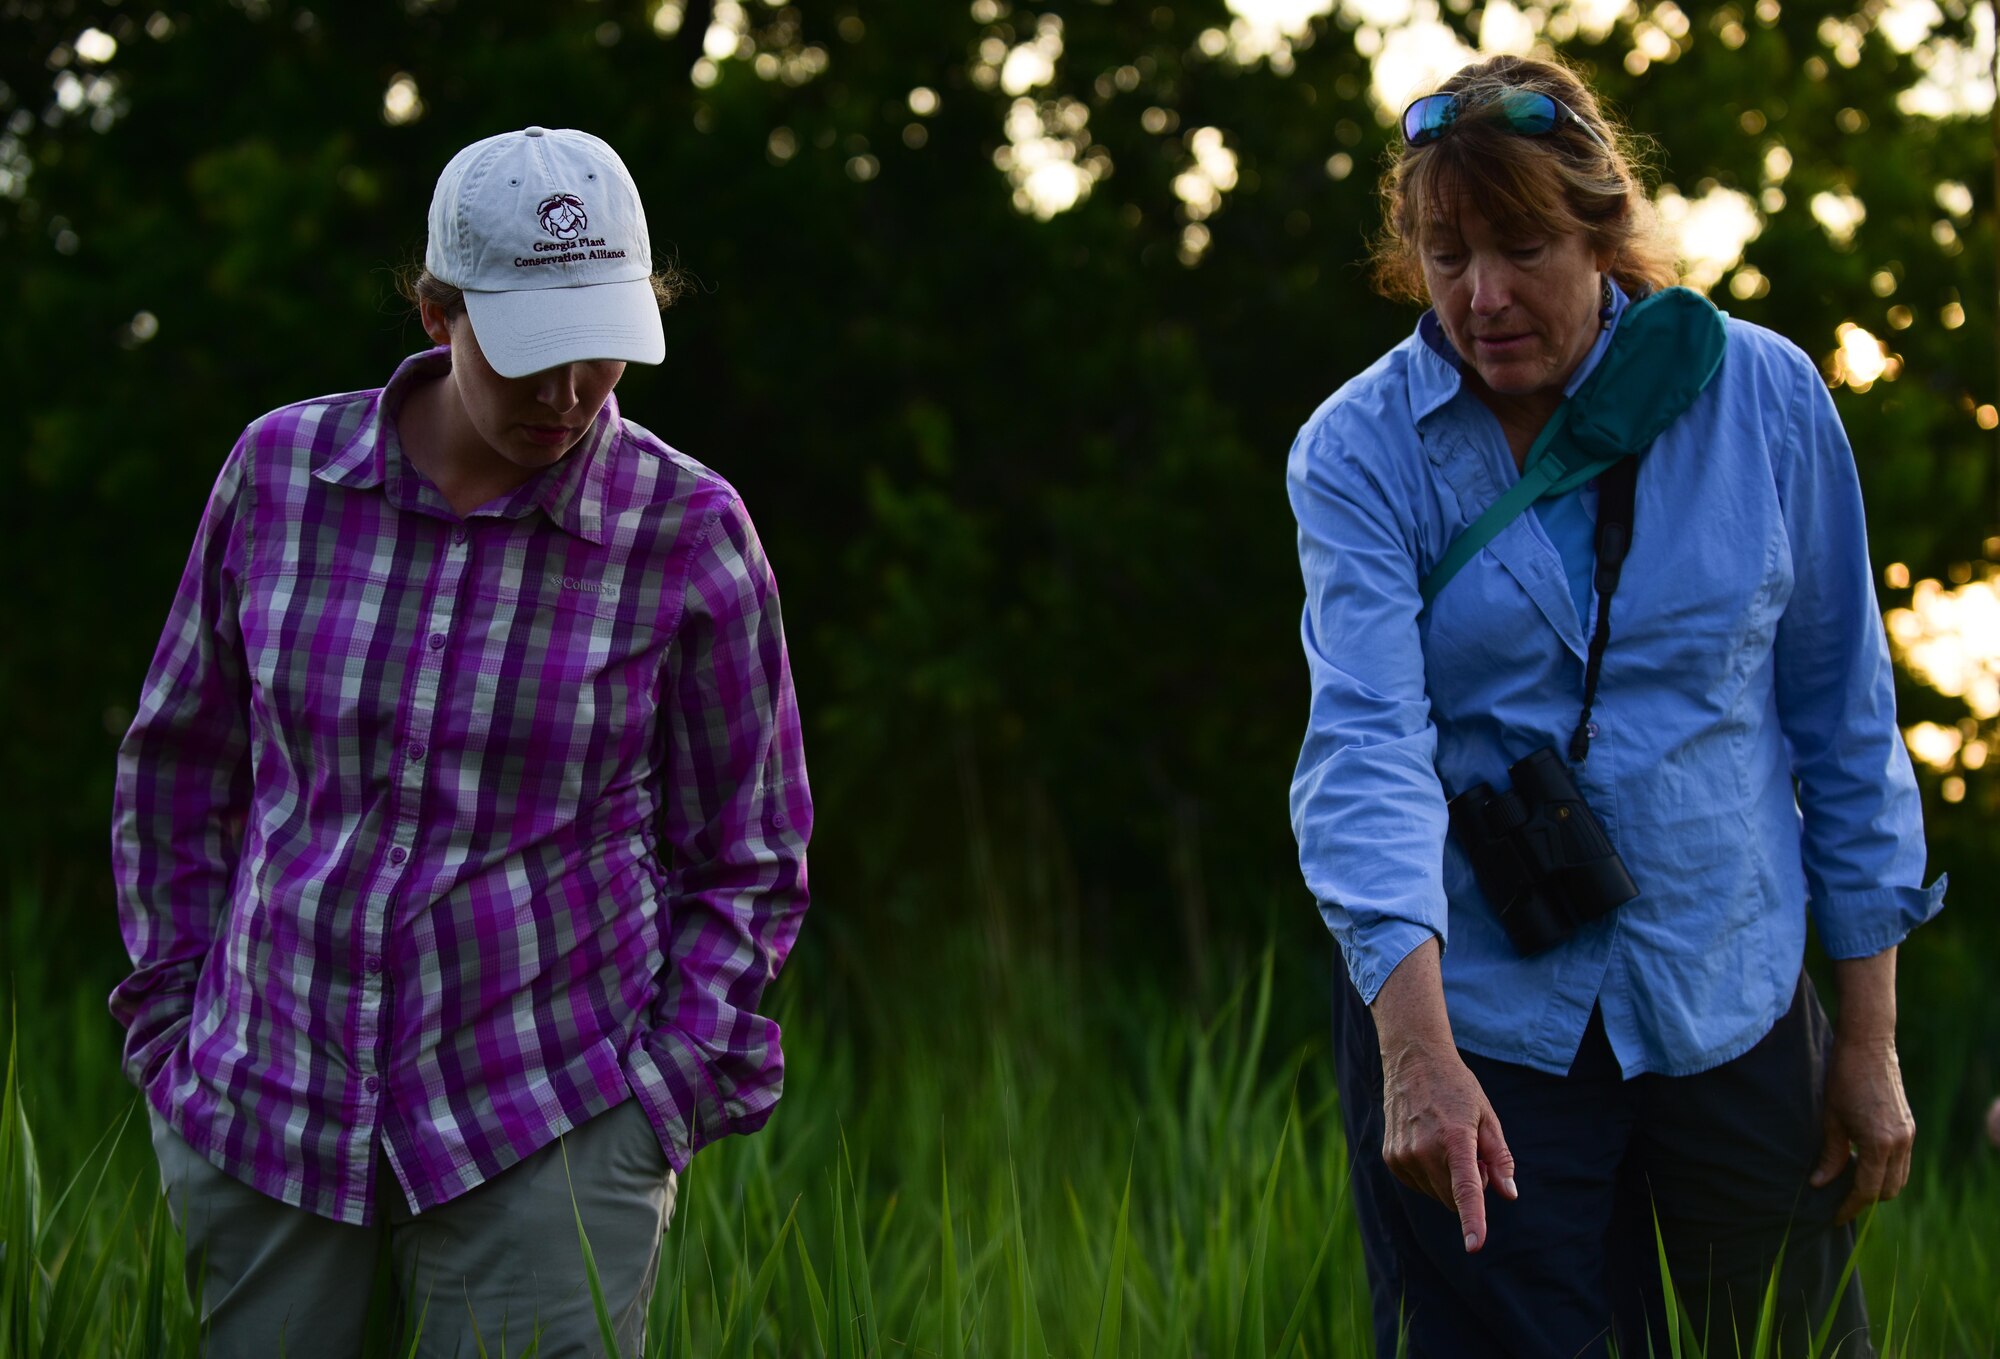 Karen Terwilliger, a local environmental expert, points out an ideal Diamondback Terrapin Turtle nesting place to Alicia Garcia, Colorado State University natural resource program manager for Langley AFB, at a brackish water marsh at Joint Base Langley-Eustis, Va., May 10, 2017. Langley Air Force Base’s shoreline, 3,000 linear feet of which was restored, is an ideal nesting place for the Diamonback Terrapin. (U.S. Air Force photo by Staff Sgt. Natasha Stannard)